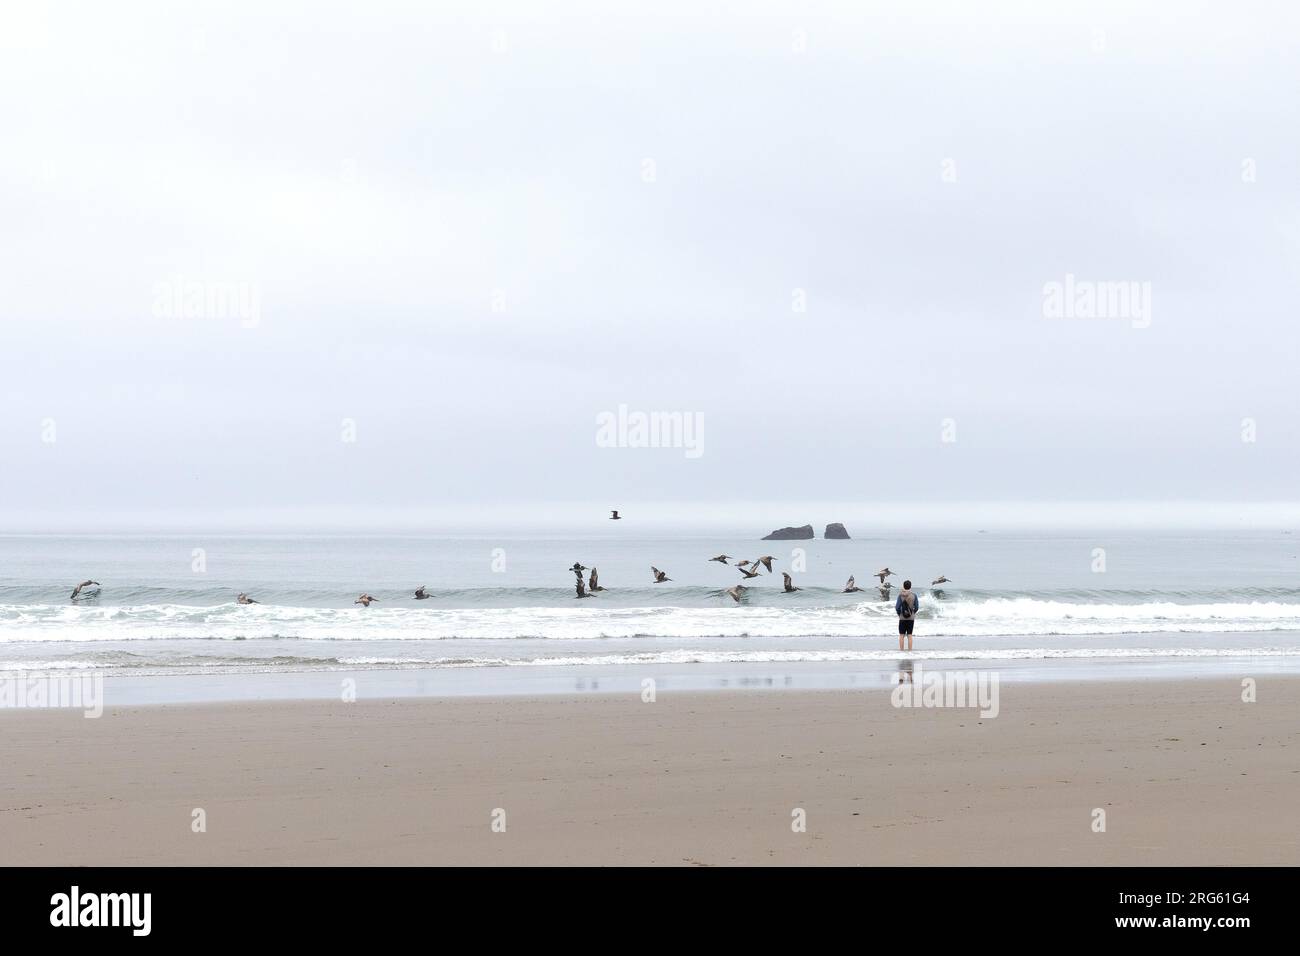 A boy standing on Face Rock Beach in Bandon, Oregon, watching pelicans fly by across the ocean, as seen from behind. Stock Photo